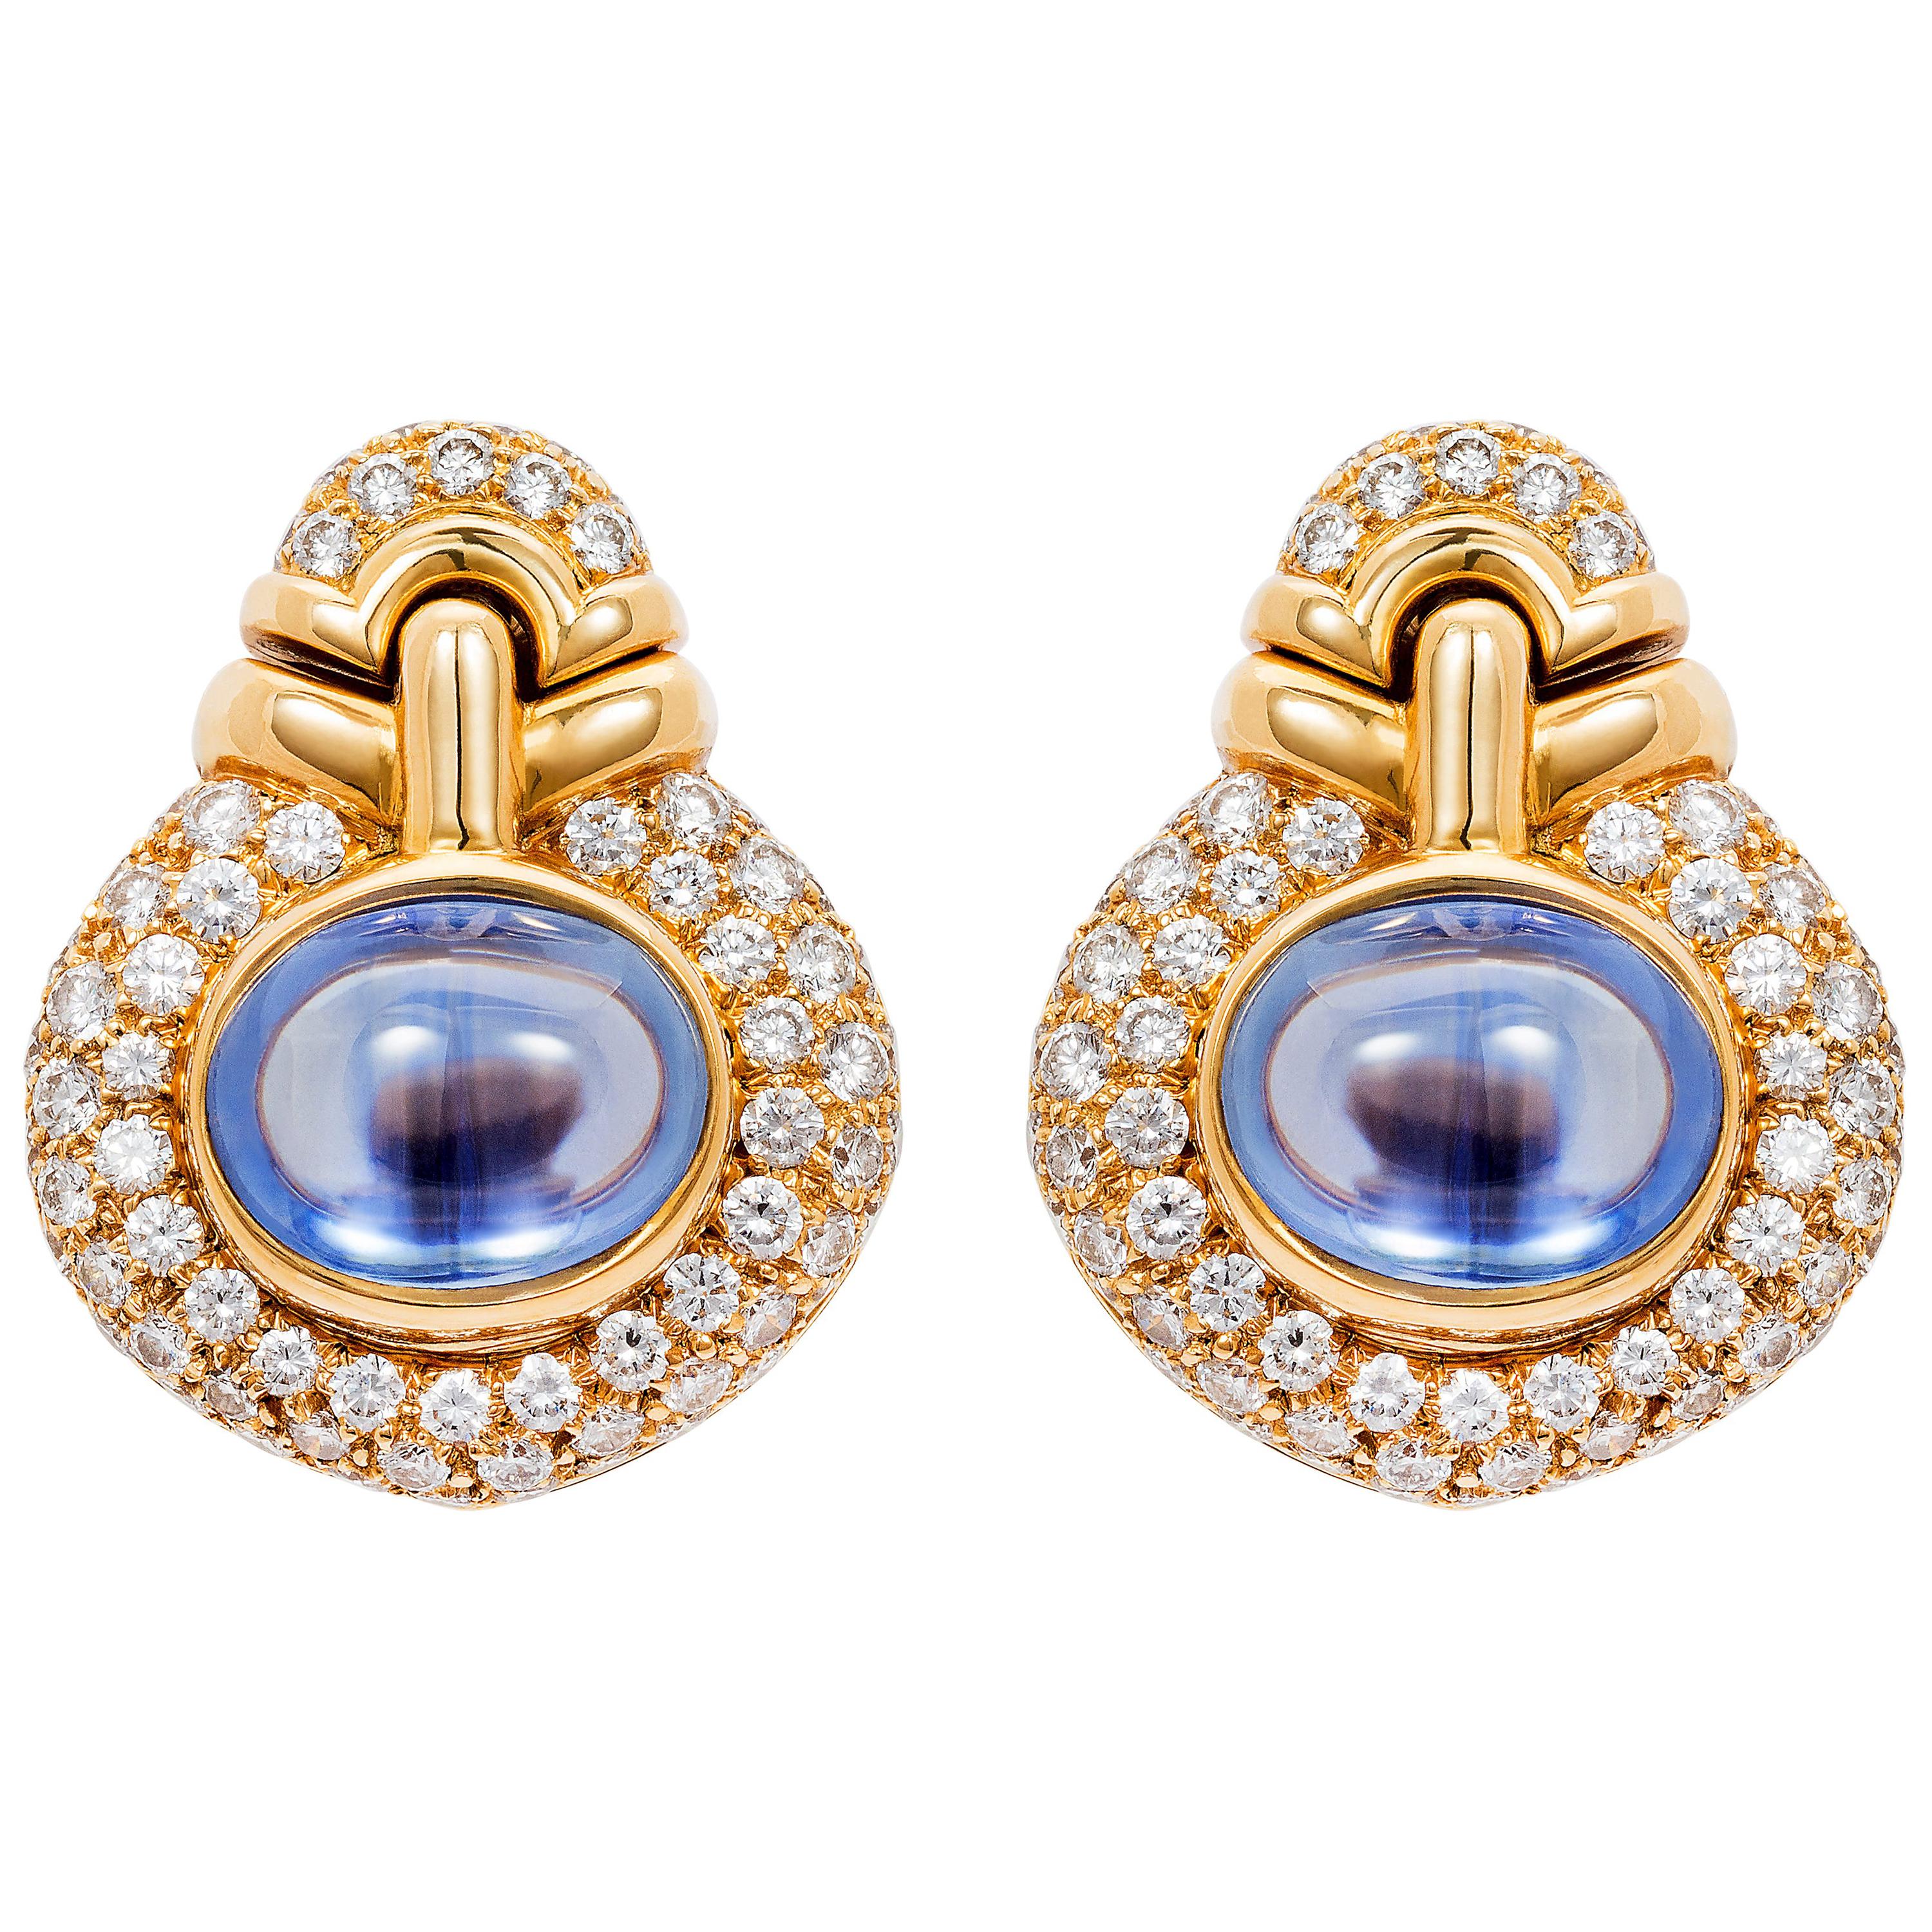 Pair of Vintage Gold, Diamond and Cabochon Sapphire Ear Clips by Bulgari